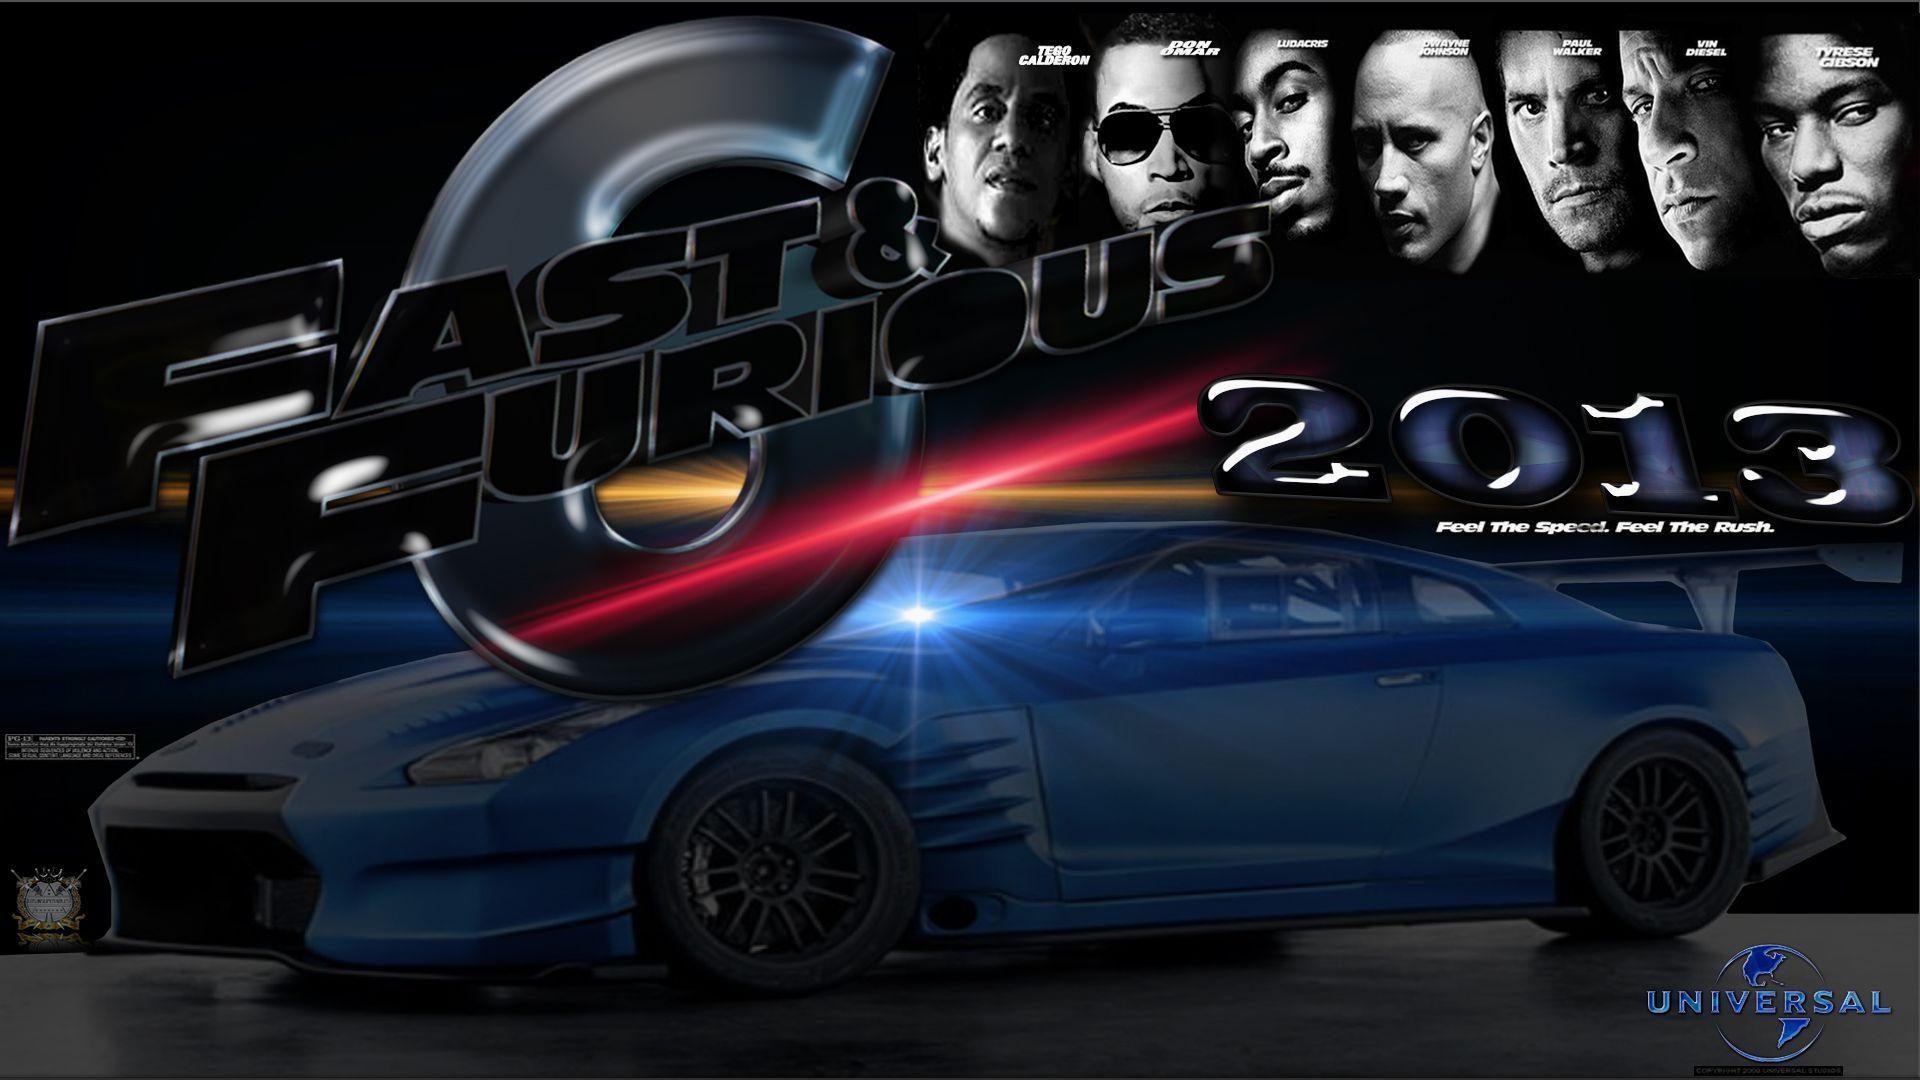 Fast and Furious HD Wallpaper Free Download